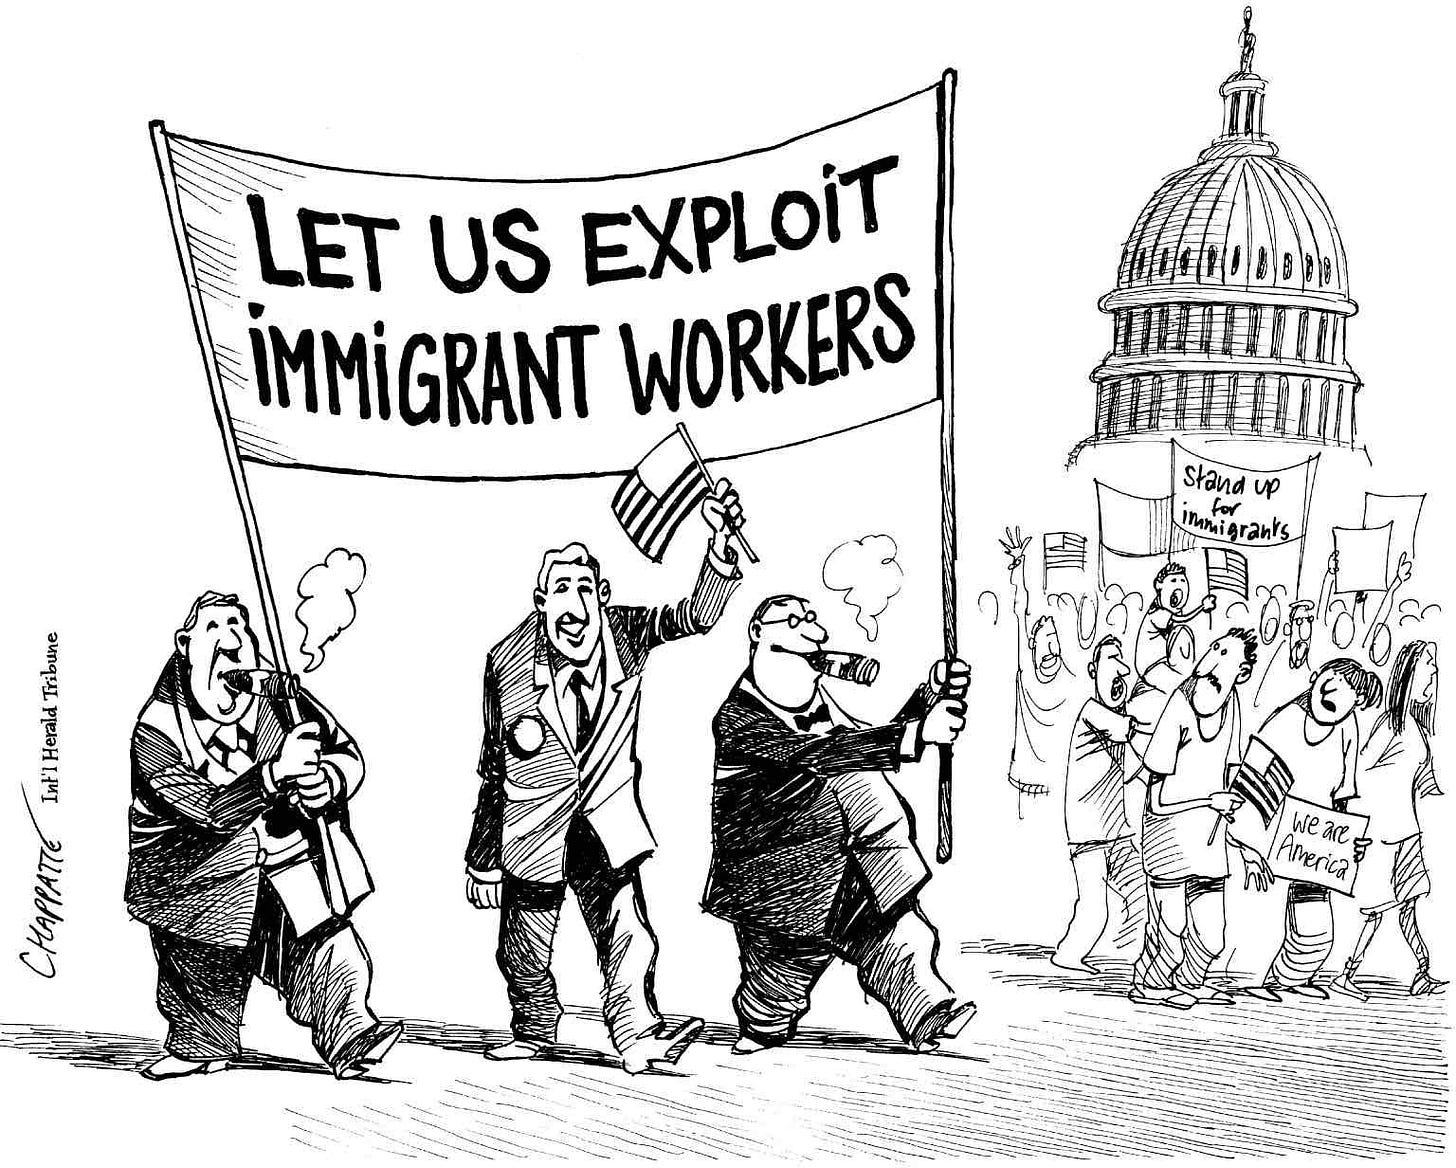 Republicans want to restrict immigration to be able to exploit workers